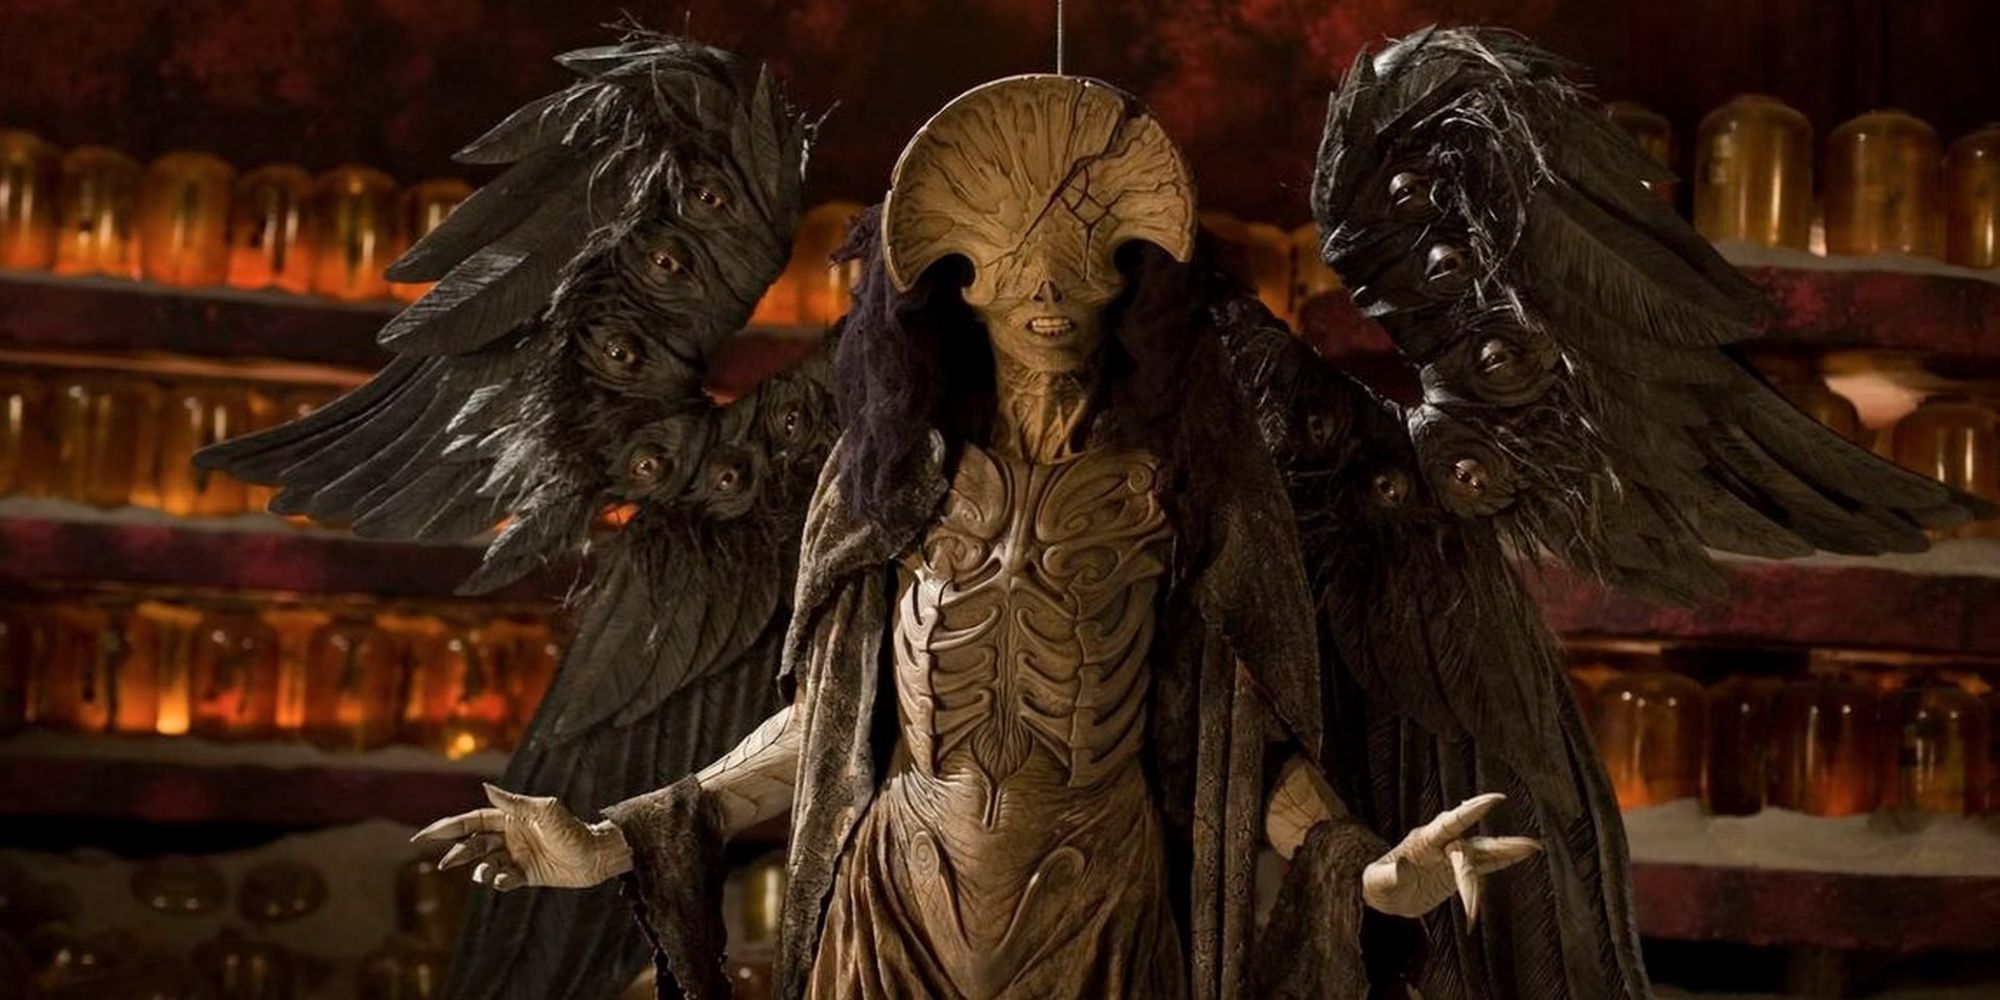 The Angel of Death in Hellboy 2